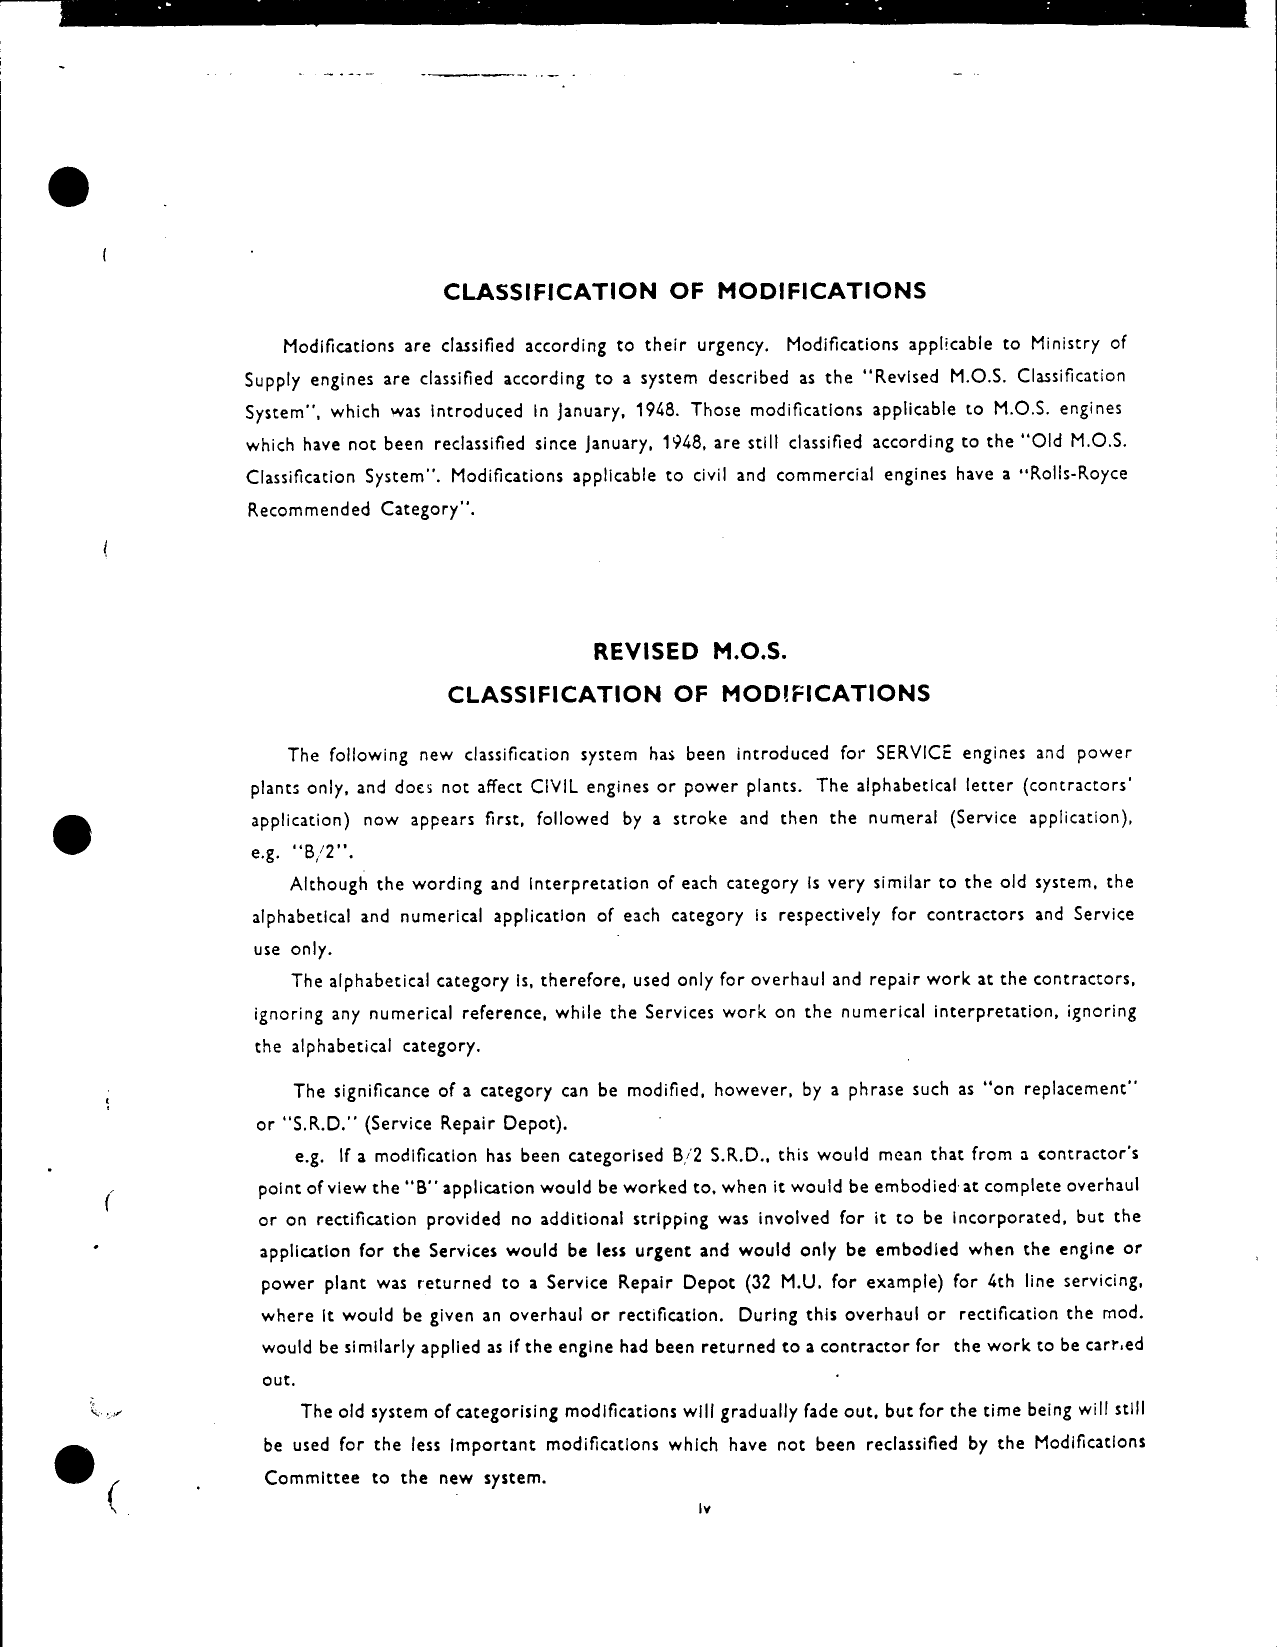 Sample page 6 from AirCorps Library document: Numerical List of Modifications on Rolls Royce Merlin Engines